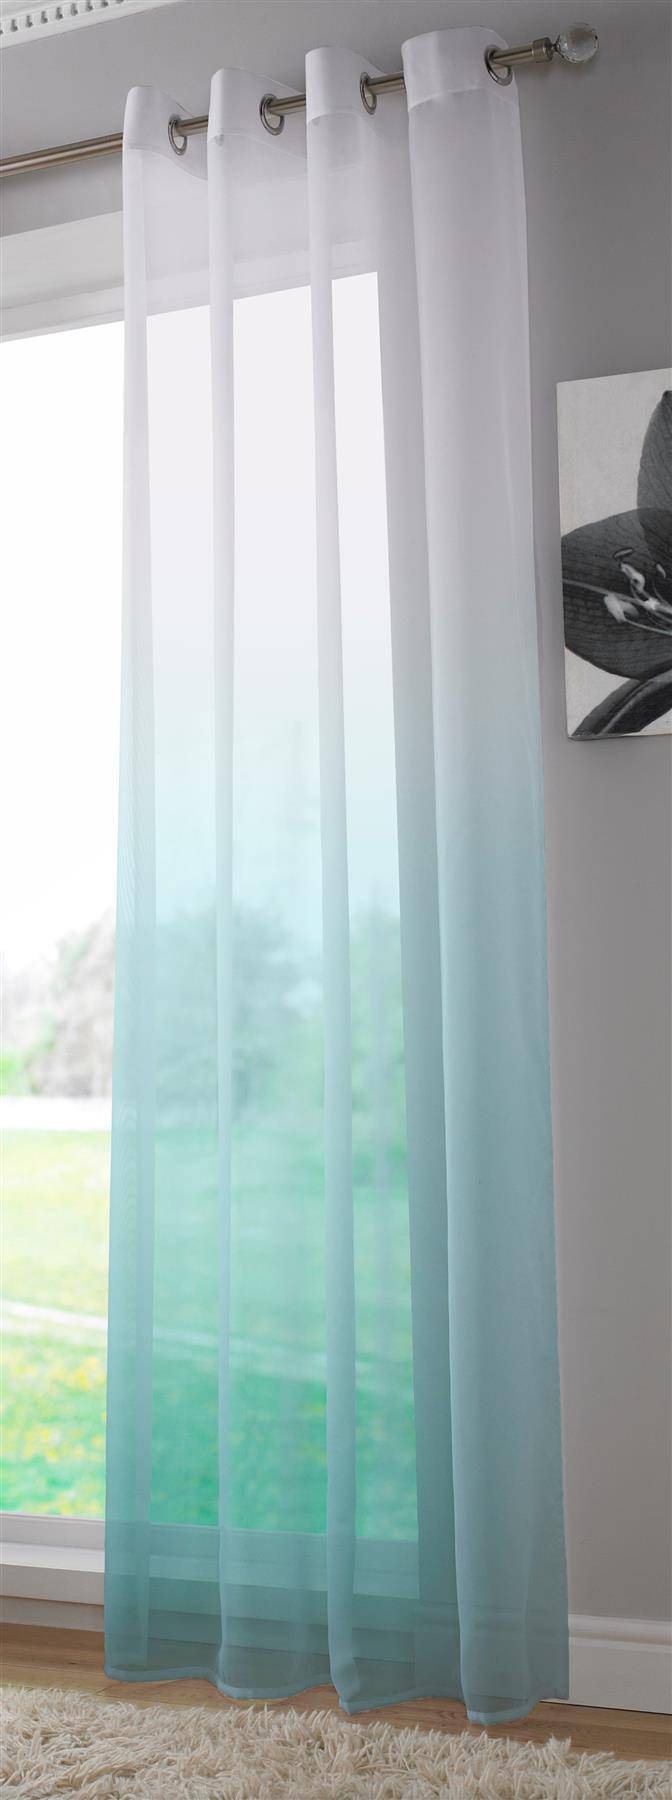 Harmony (Ring Top Curtain Panel) - TidySpaces